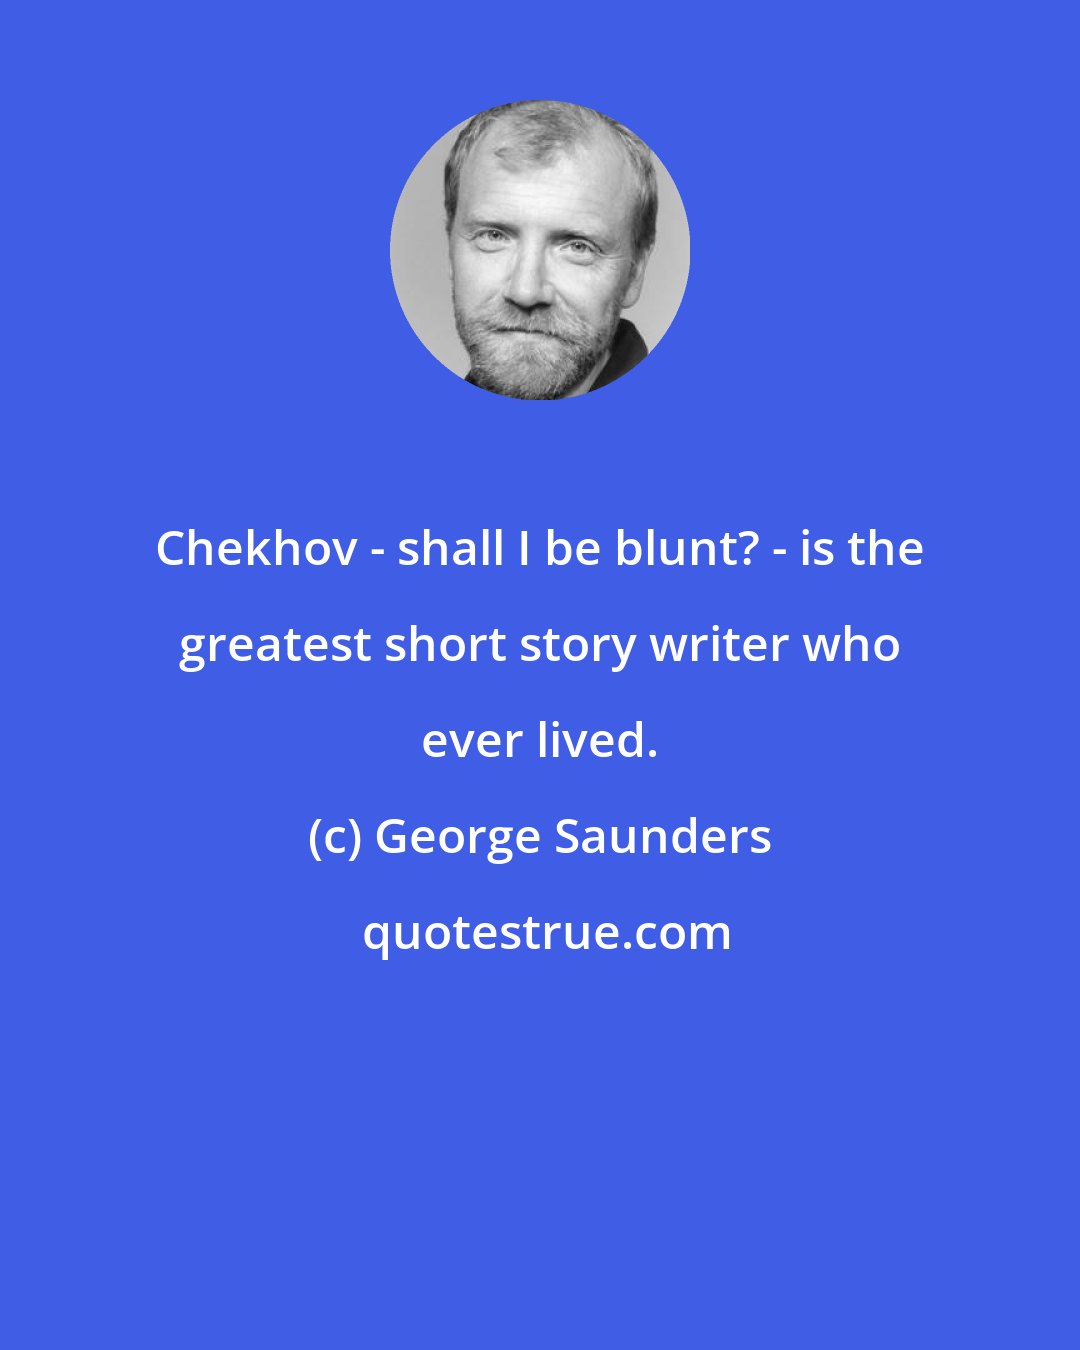 George Saunders: Chekhov - shall I be blunt? - is the greatest short story writer who ever lived.